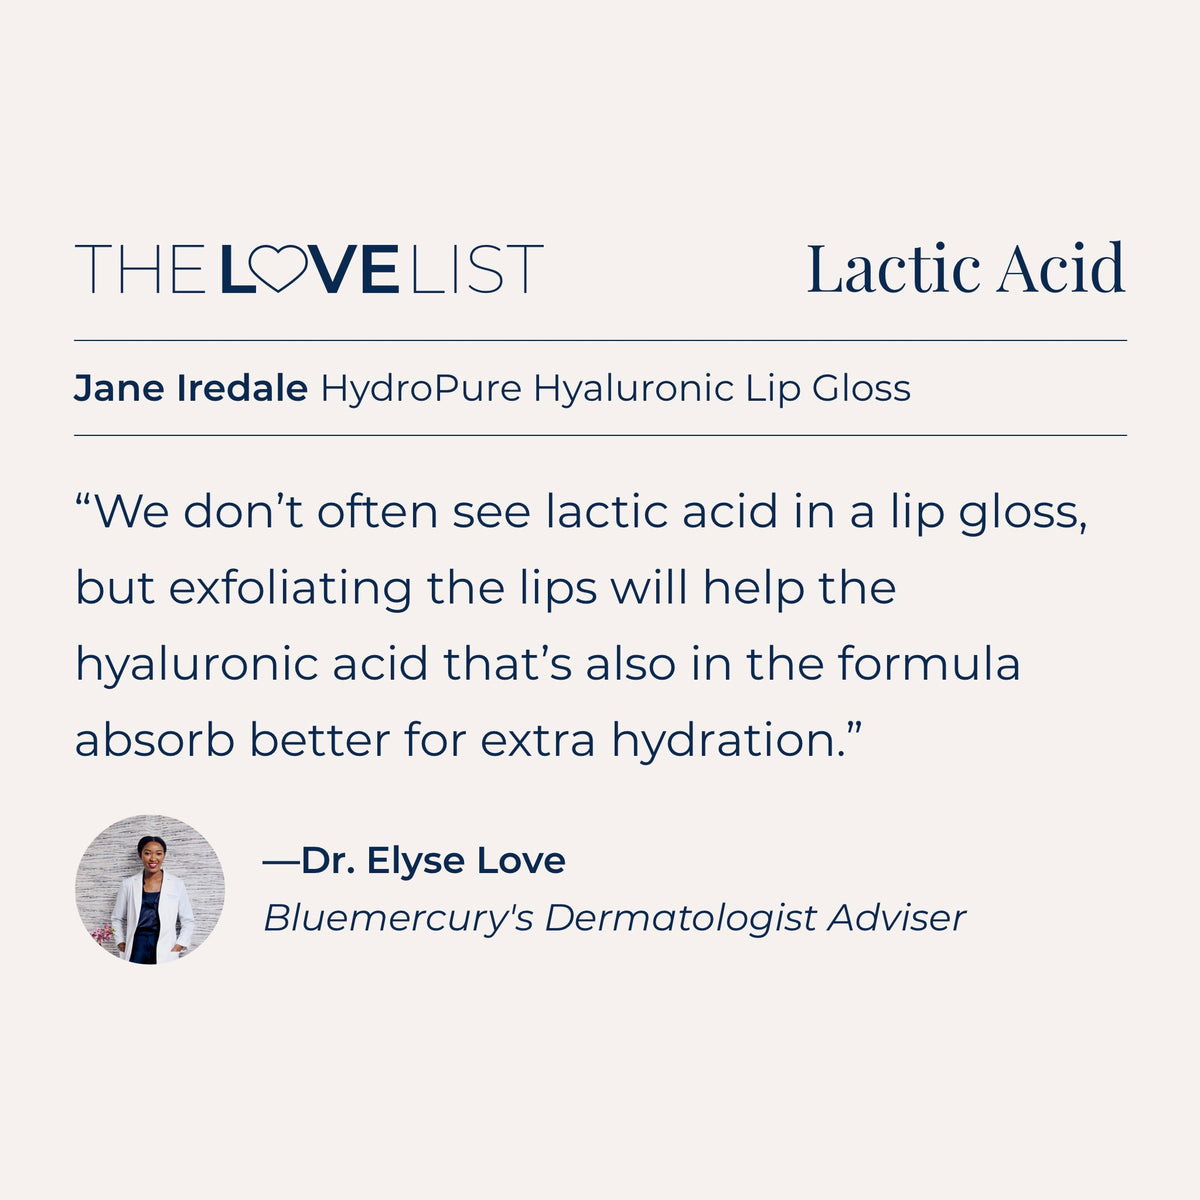 Jane Iredale HydroPure Hyaluronic Lip Gloss . This product is in the color red